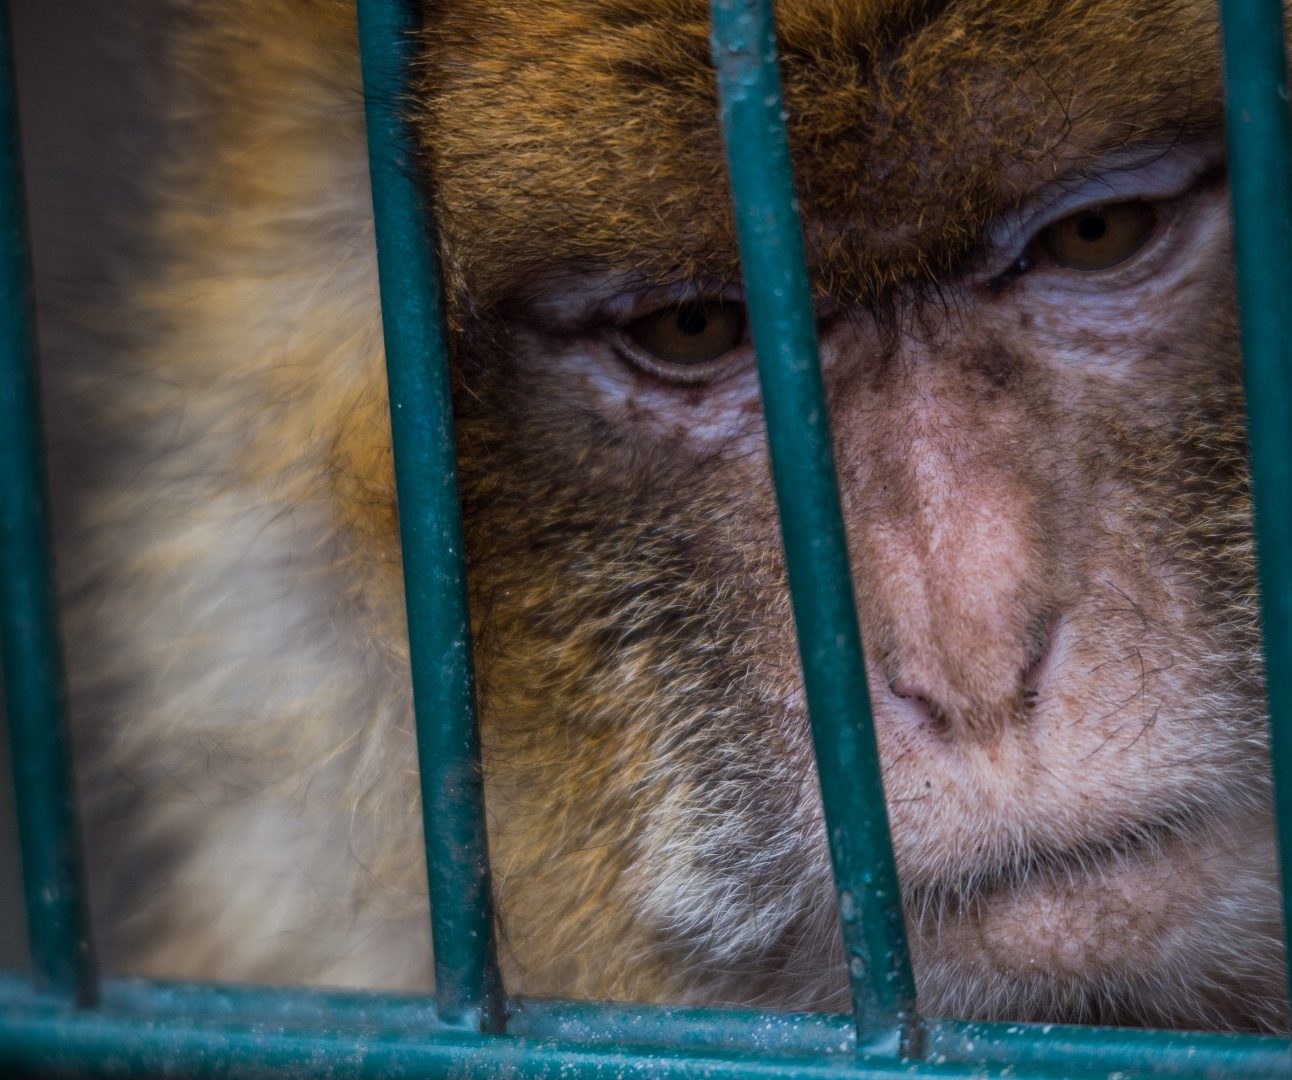 A macaque staring through the bars of a cage